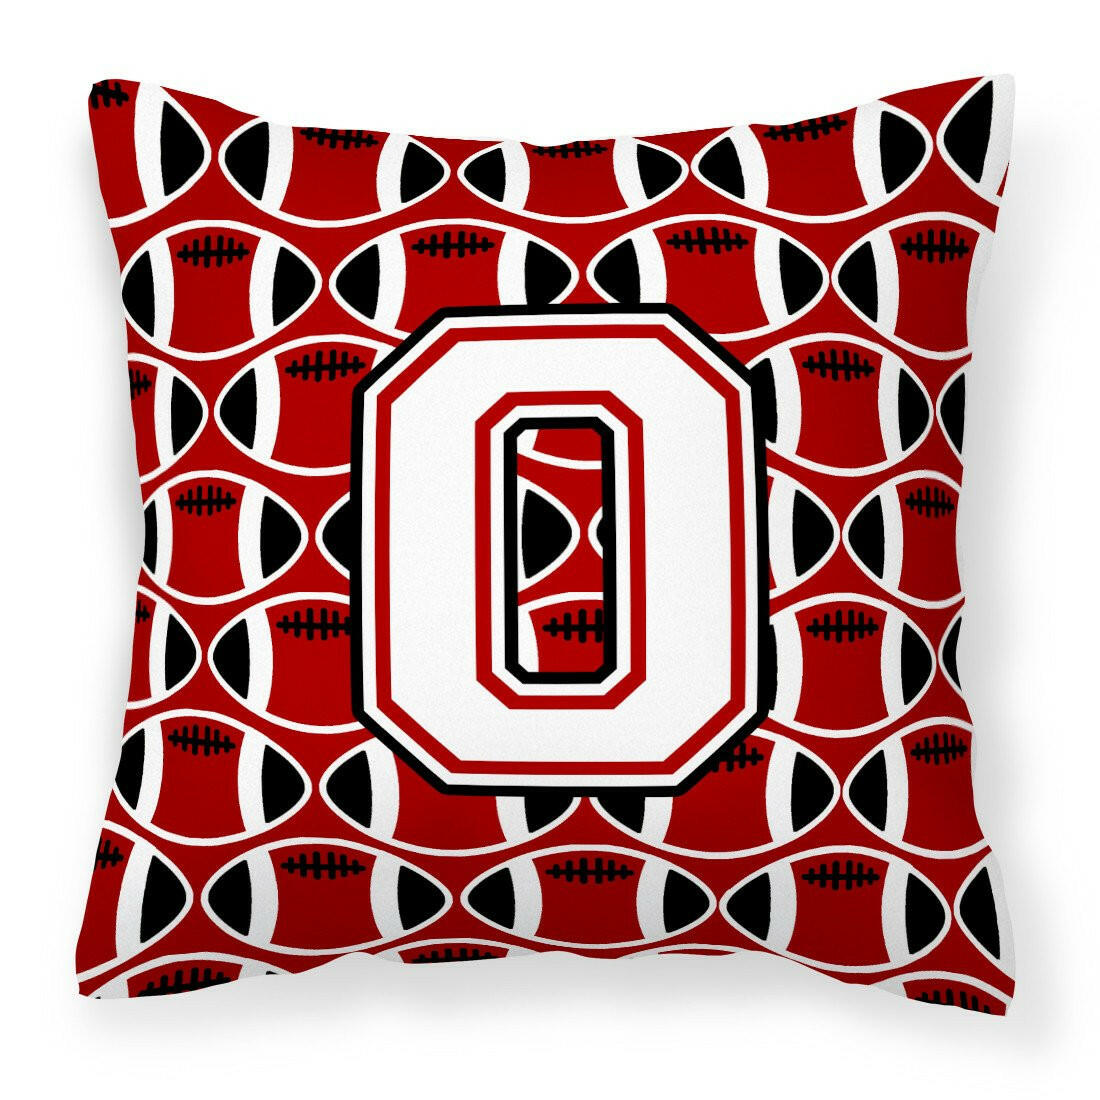 Letter O Football Cardinal and White Fabric Decorative Pillow CJ1082-OPW1414 by Caroline's Treasures